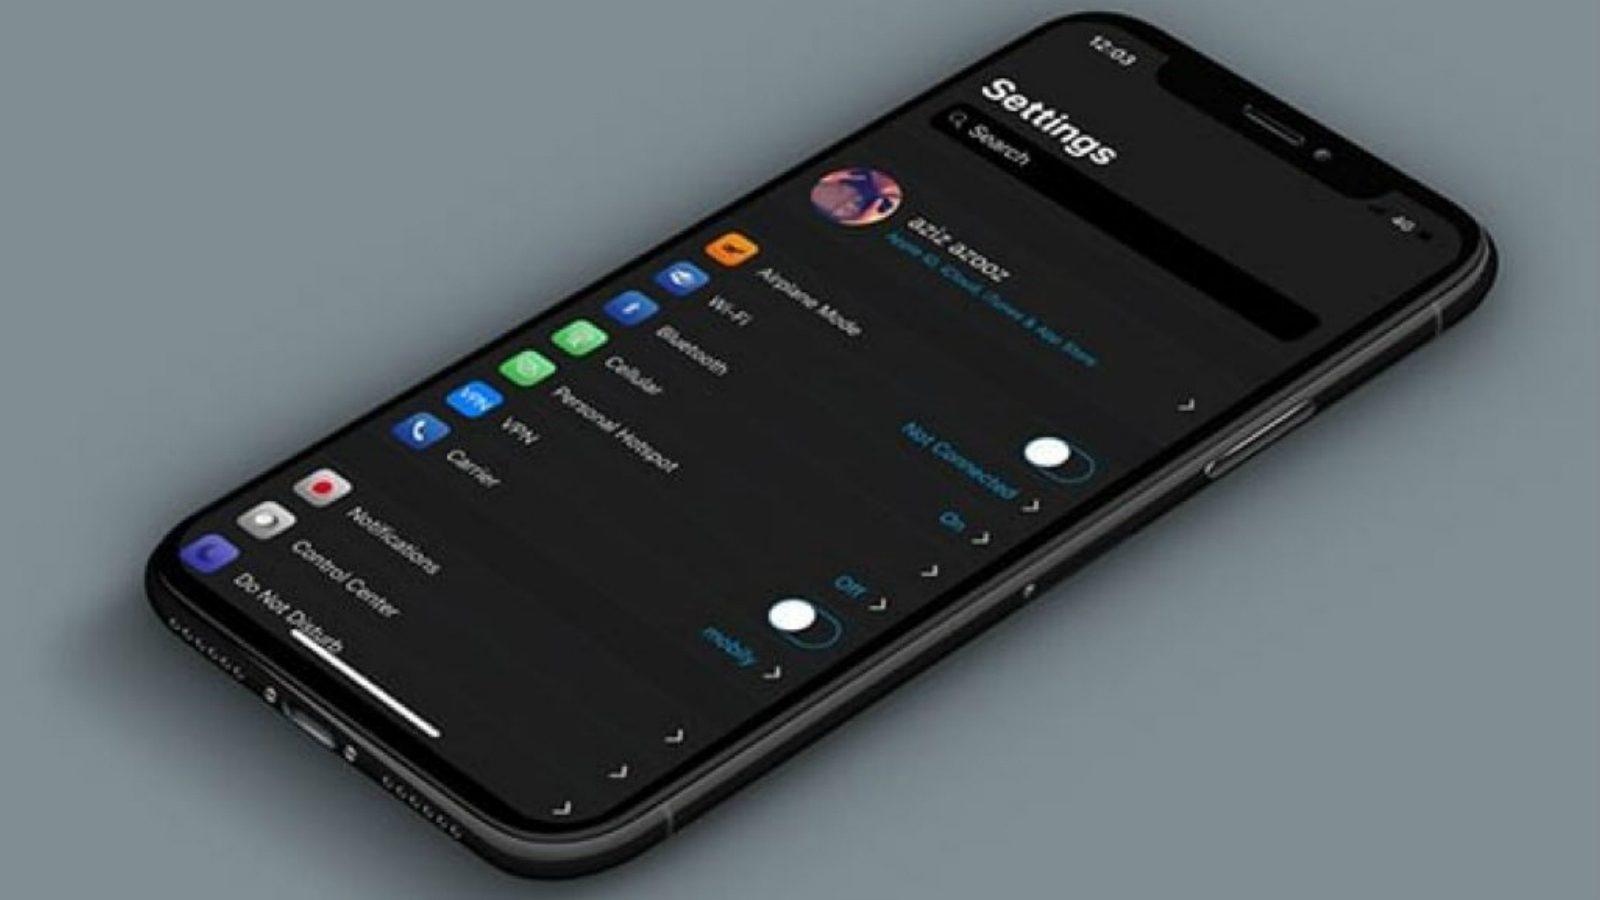 How to replicate Dark Mode on iPhone and iPad with Smart Invert